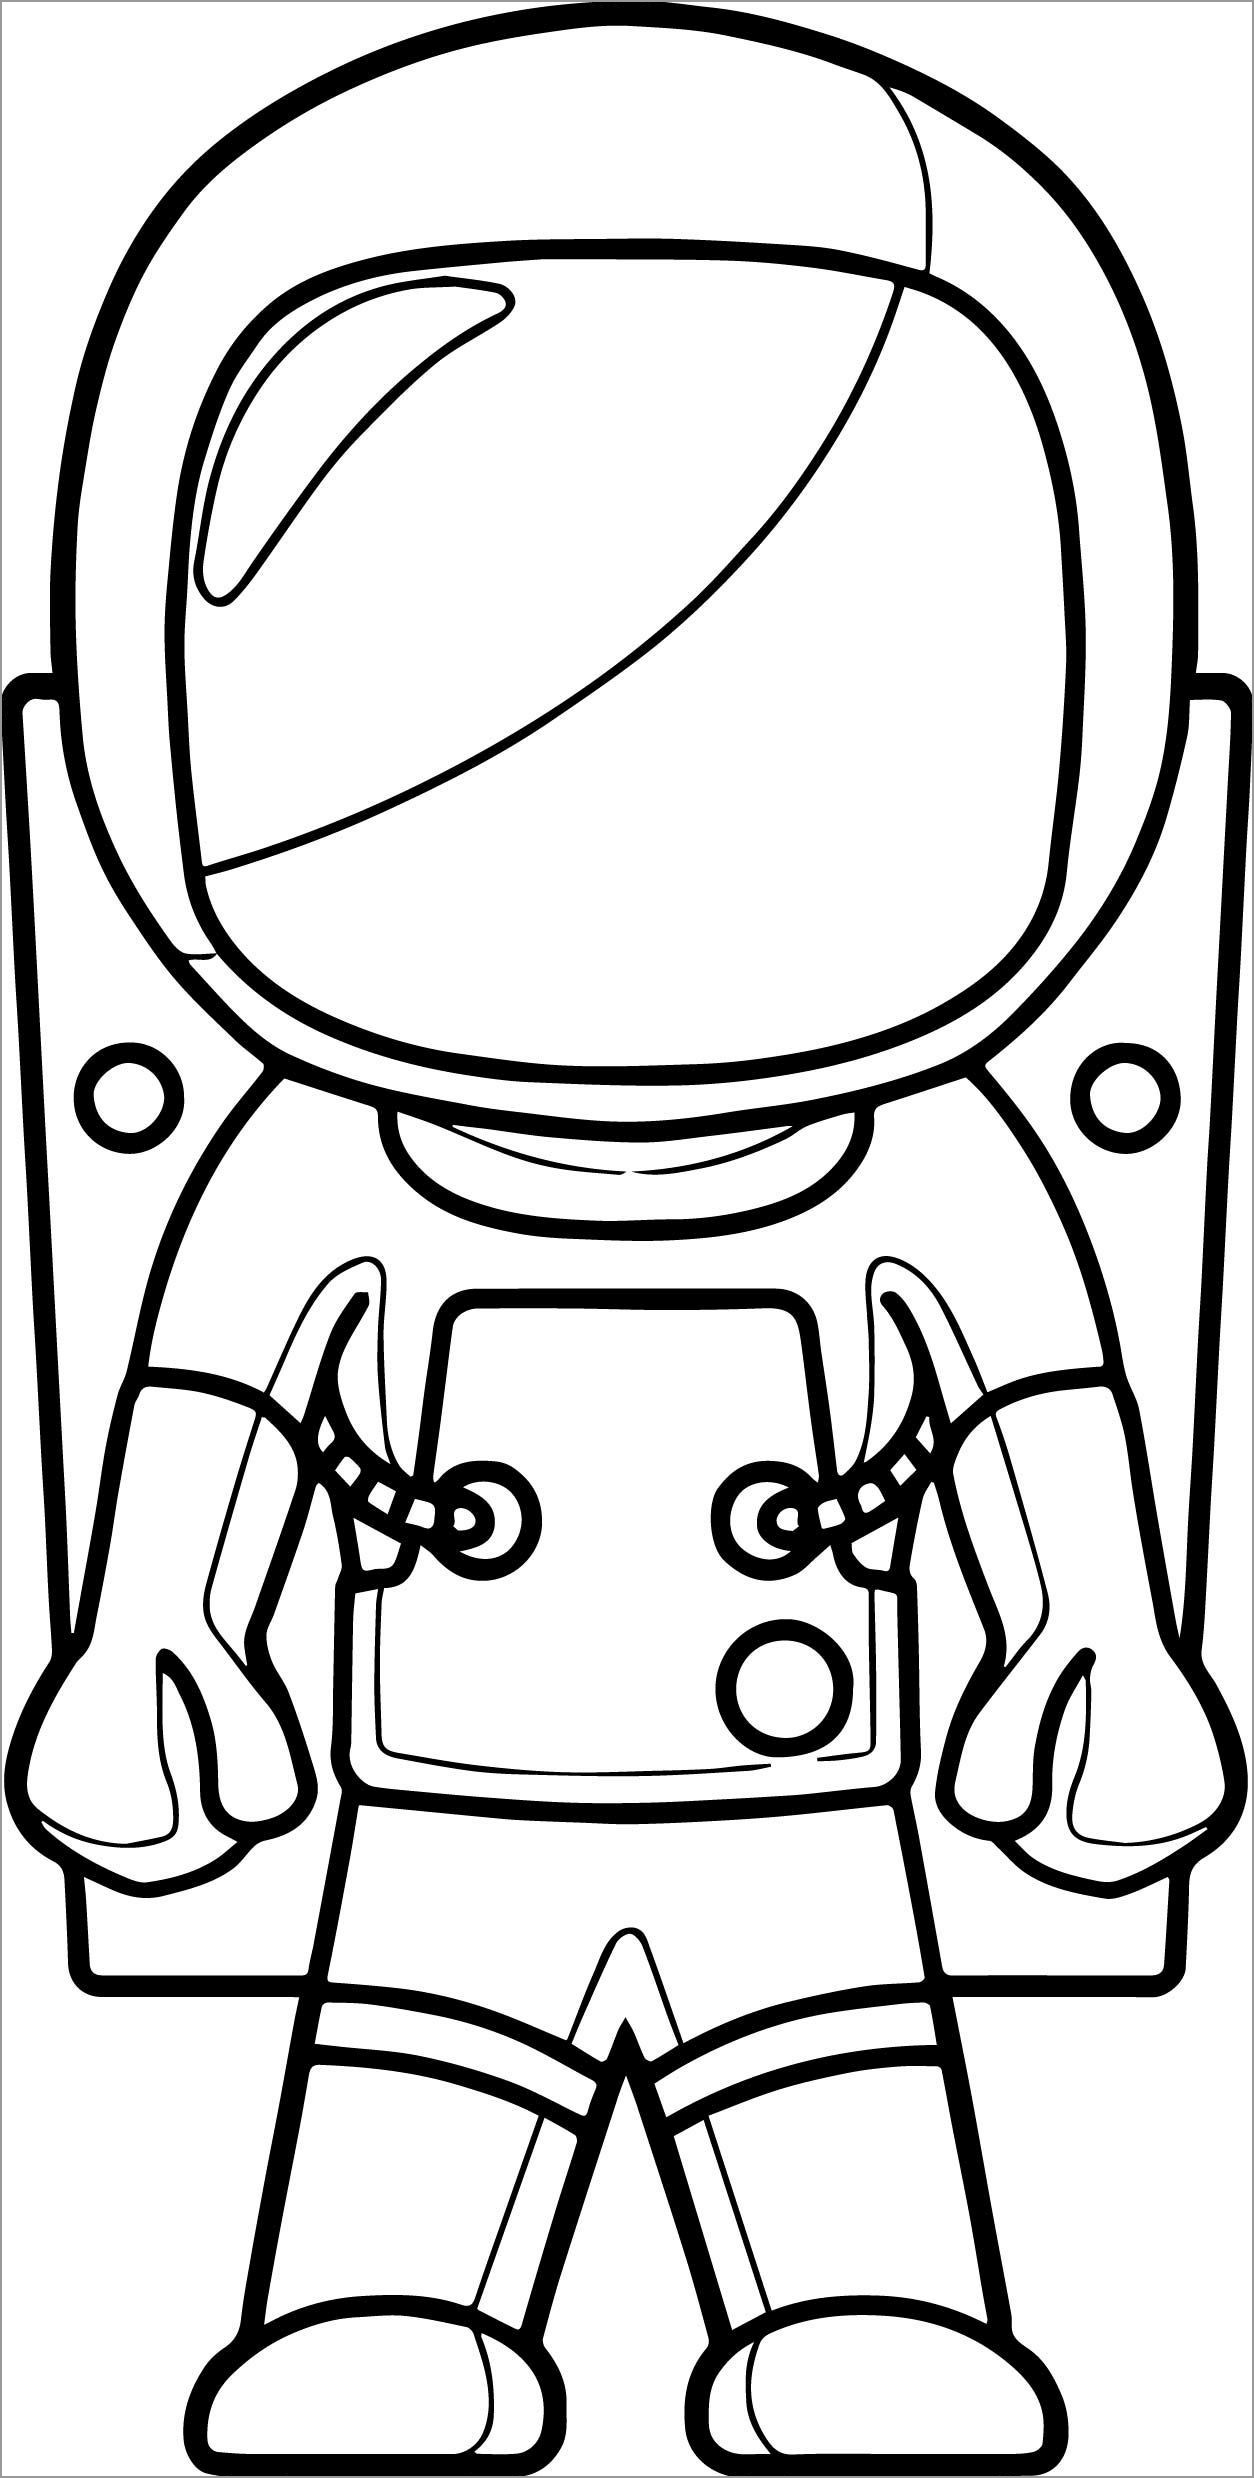 Cartoon astronaut Coloring Pages